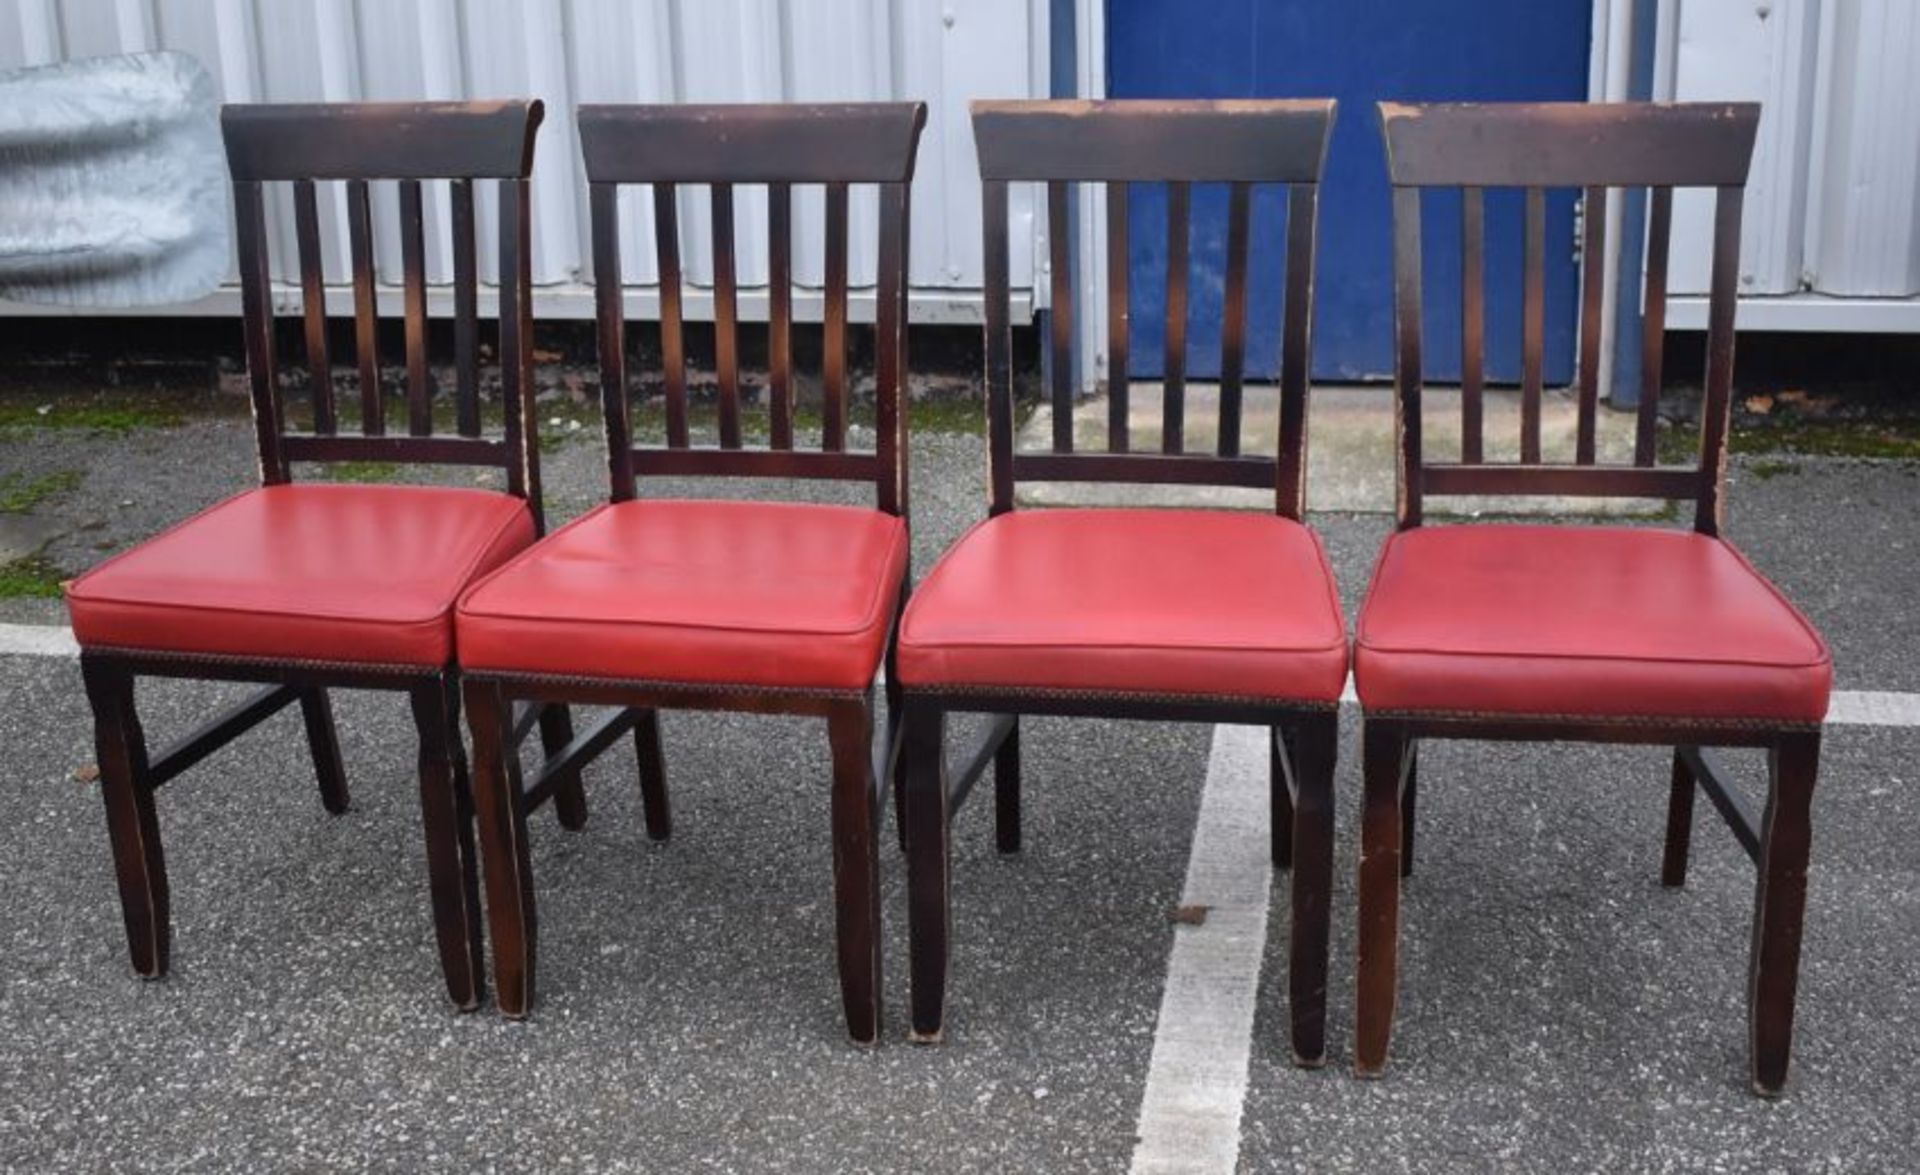 16 x Restaurant Dining Chairs With Dark Stained Wood Finish and Red Leather Seat Pads - Recently - Image 4 of 6